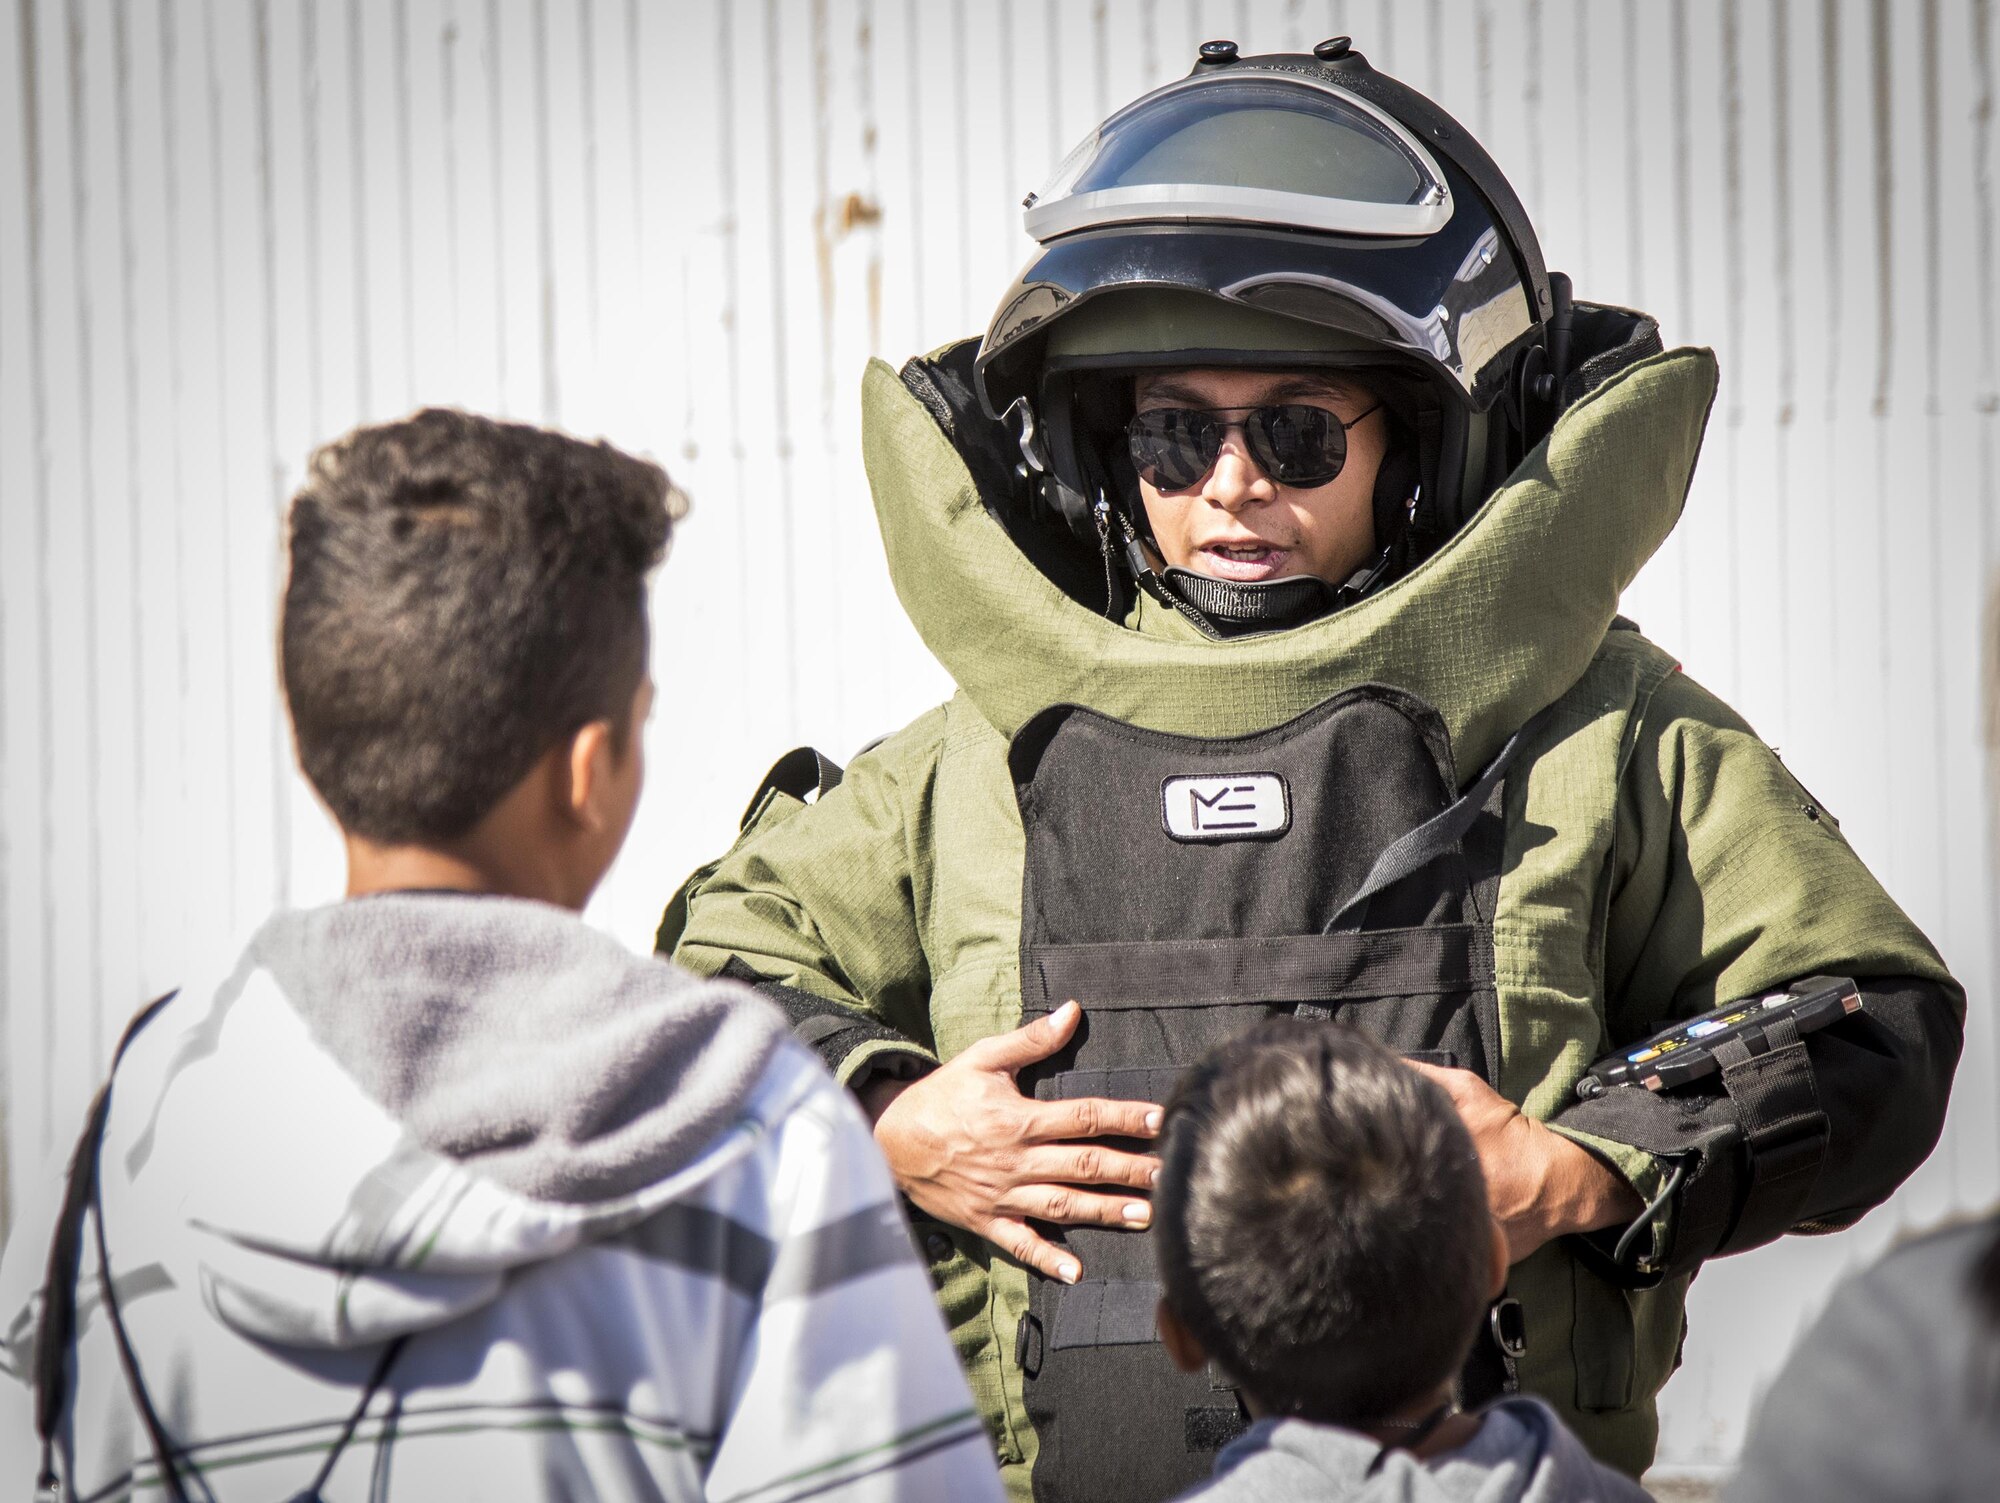 An Airman explains the explosive ordnance disposal bomb suit to a couple of recruits during the Operation Hero event Oct. 22 at Eglin Air Force Base, Fla.  More than 100 kids participated in the mock deployment experience created to give military children a glimpse of what their loved ones go through when they leave home. The kids went through a deployment line to get their dog tags and “immunizations” before they were briefed by the commander and shipped off to a deployed location. There, they participated in various activities and demonstrations by local base agencies. (U.S. Air Force photo/Samuel King Jr.)